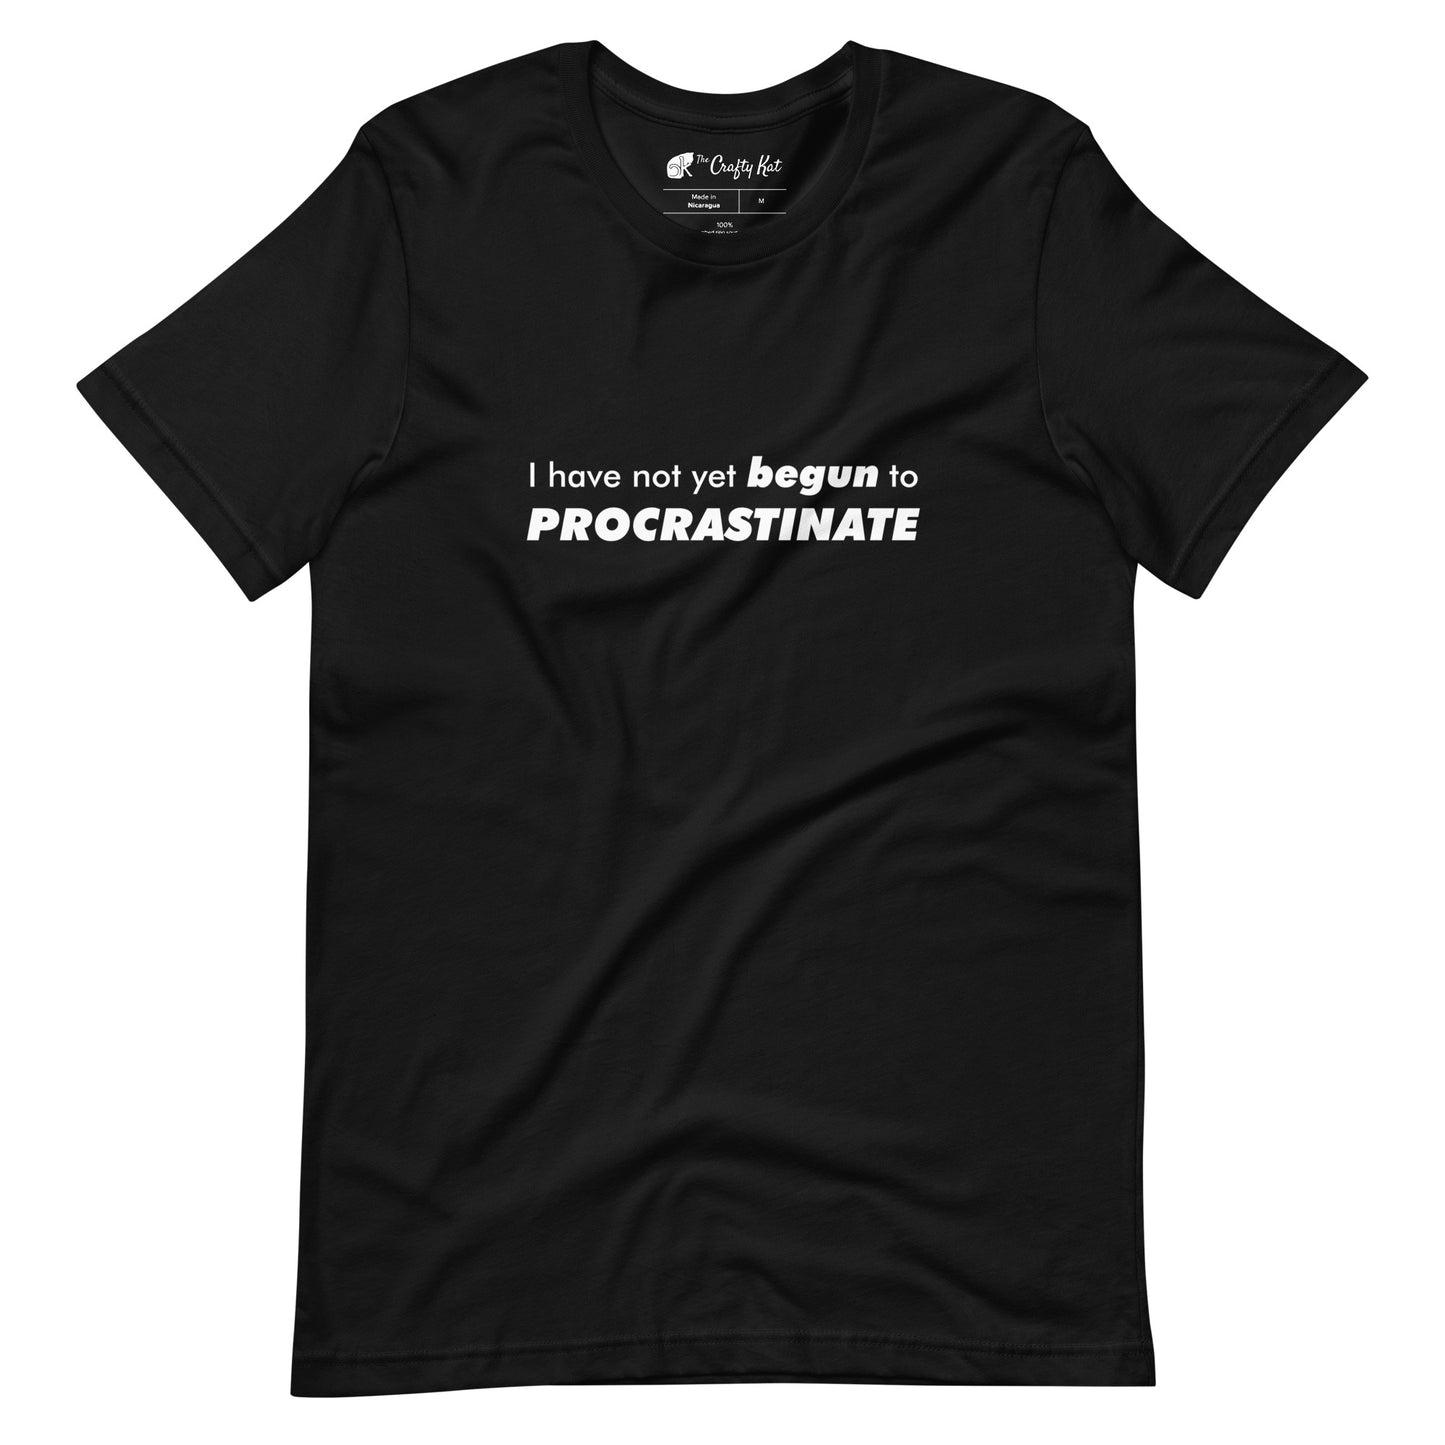 Black t-shirt with text graphic: "I have not yet BEGUN to PROCRASTINATE"